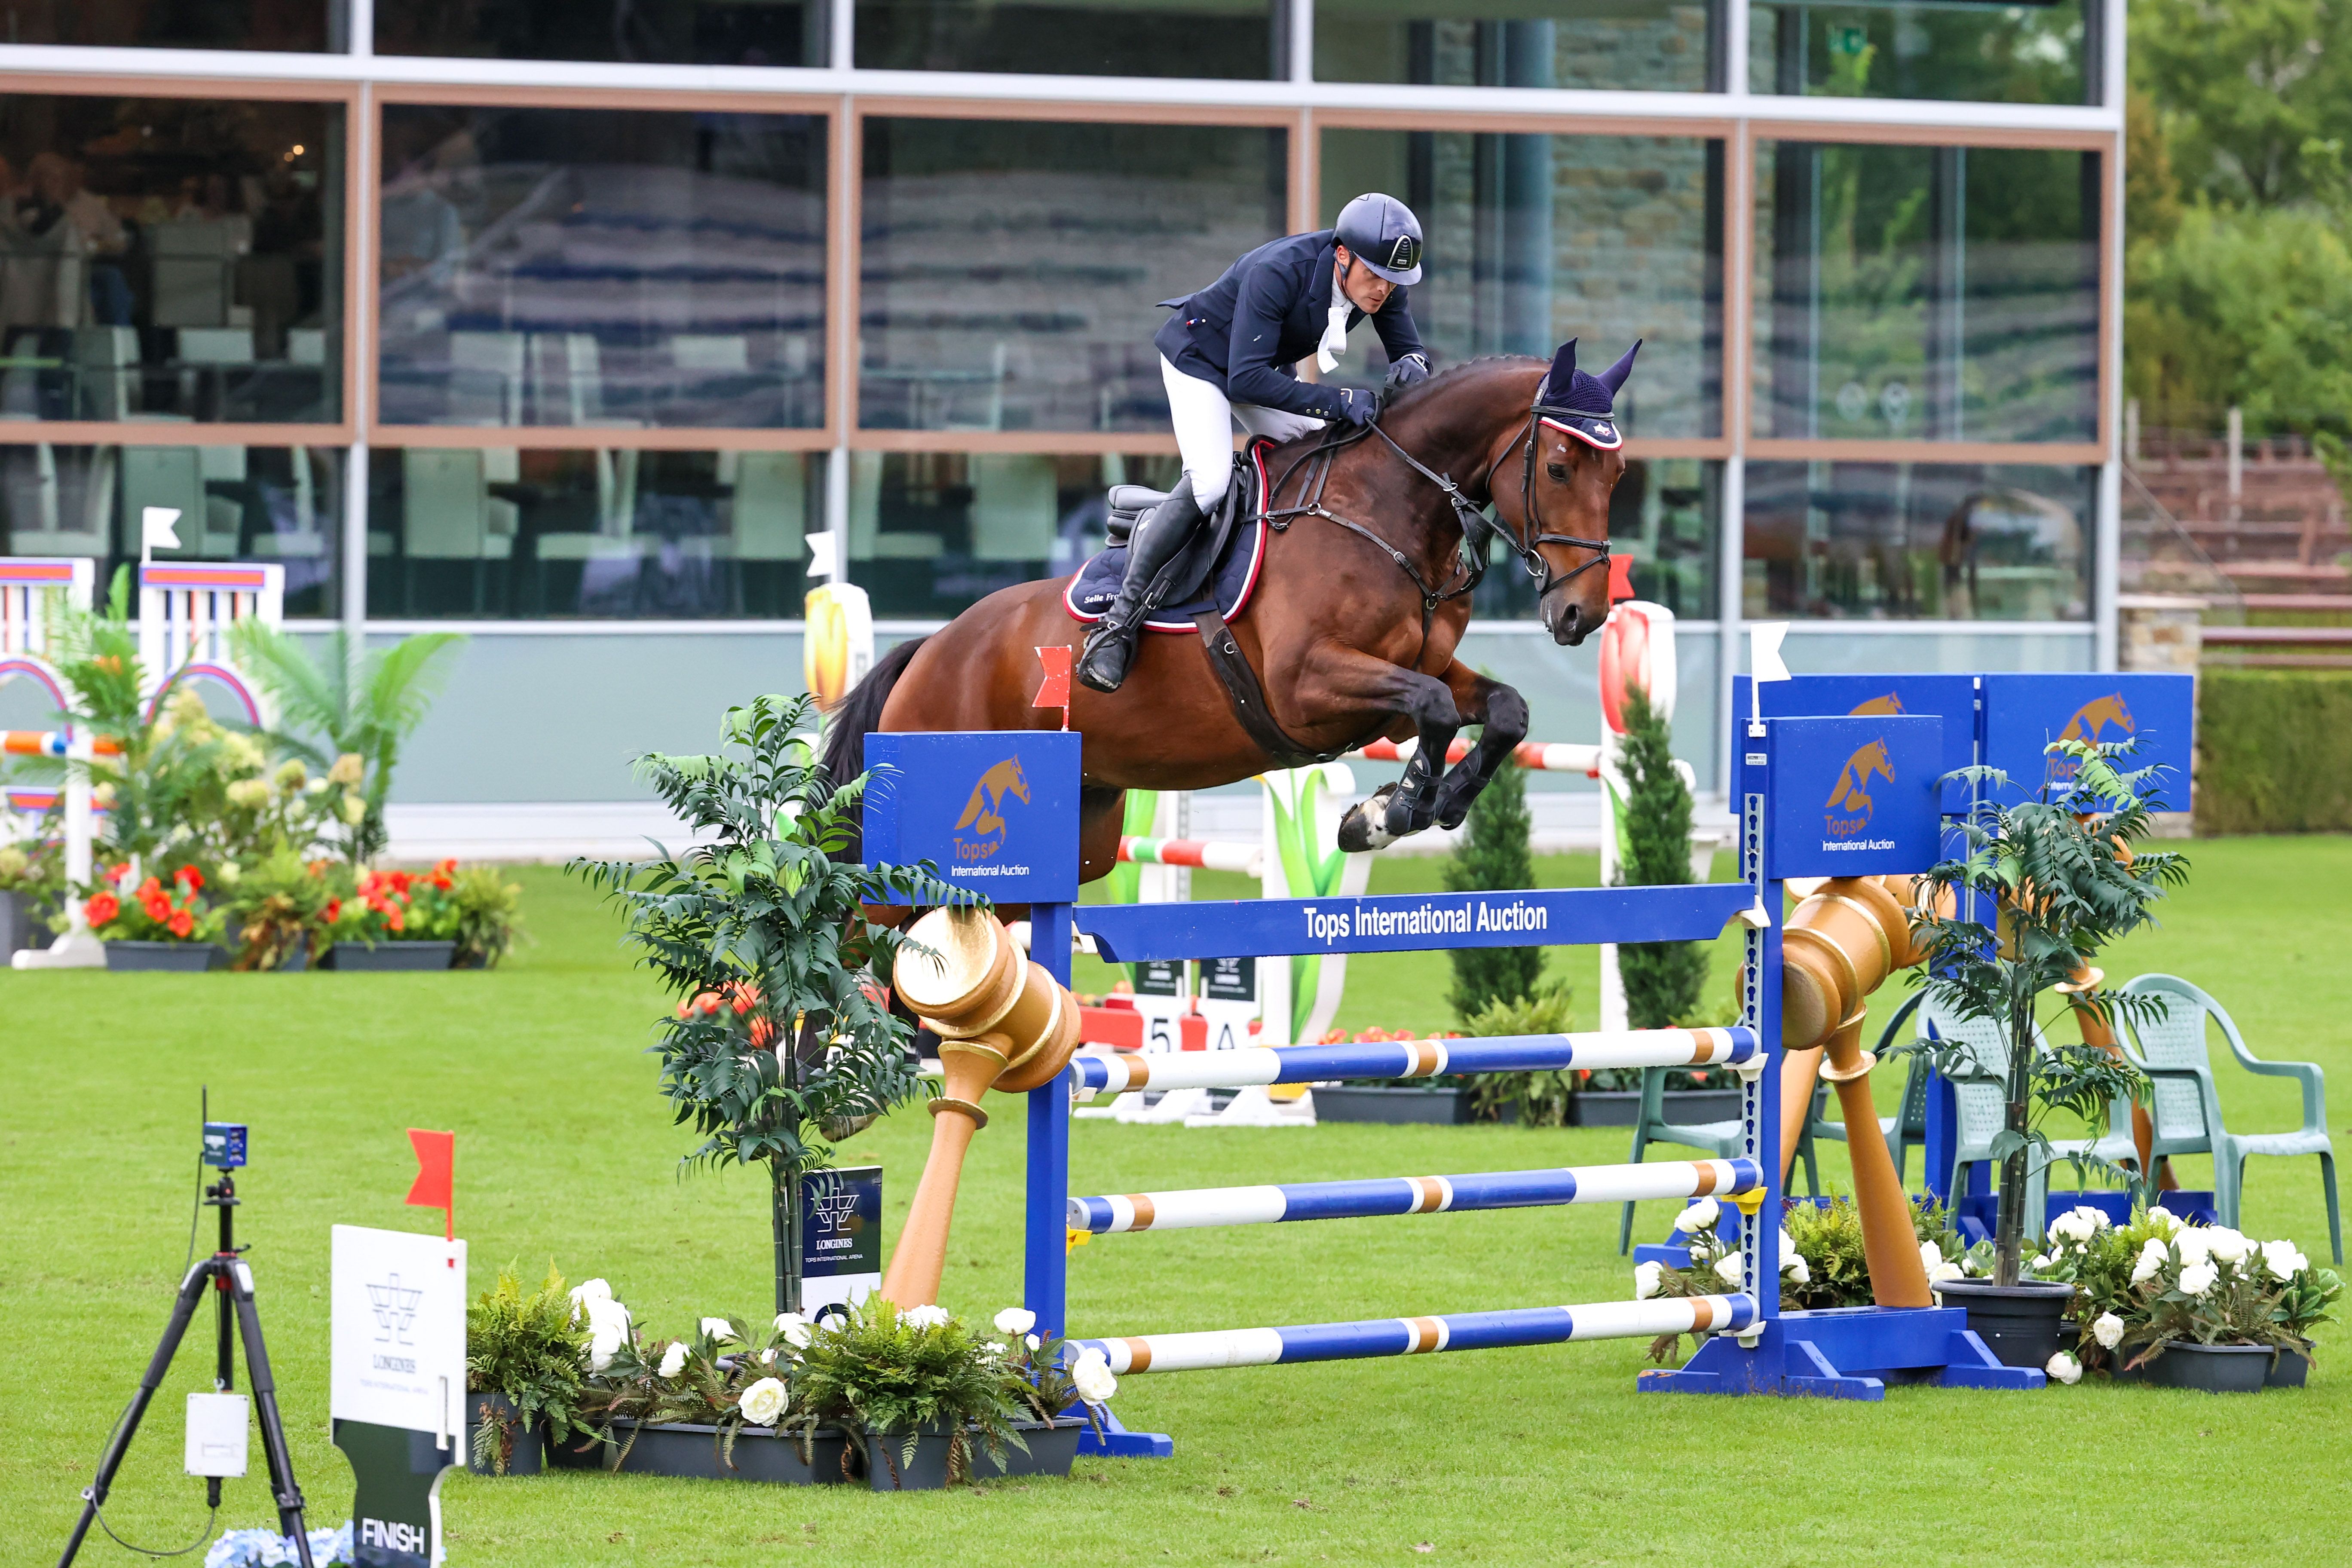 KWPN, Hannoveraner and Selle Francais dominate on day 2 of WBFSH Studbooks Jumping Global Champions Trophy